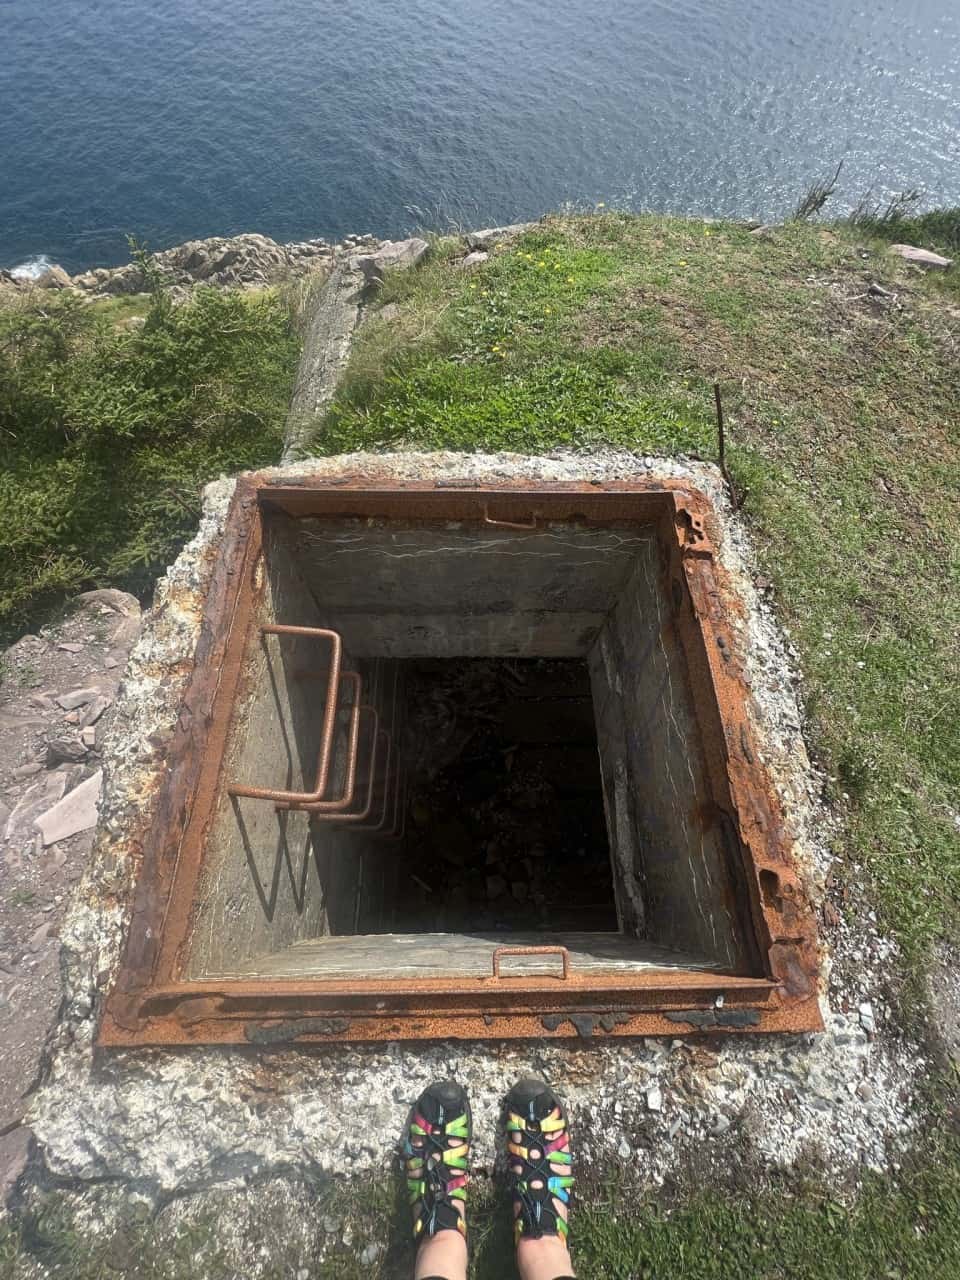 World War II Observation Station in St. John's on the East Coast Trail and Sugar Loaf Path - The observation station looks out over the cliff, but the entryway from above, that you see here, is how you get into the station when visiting this St. John's attraction.